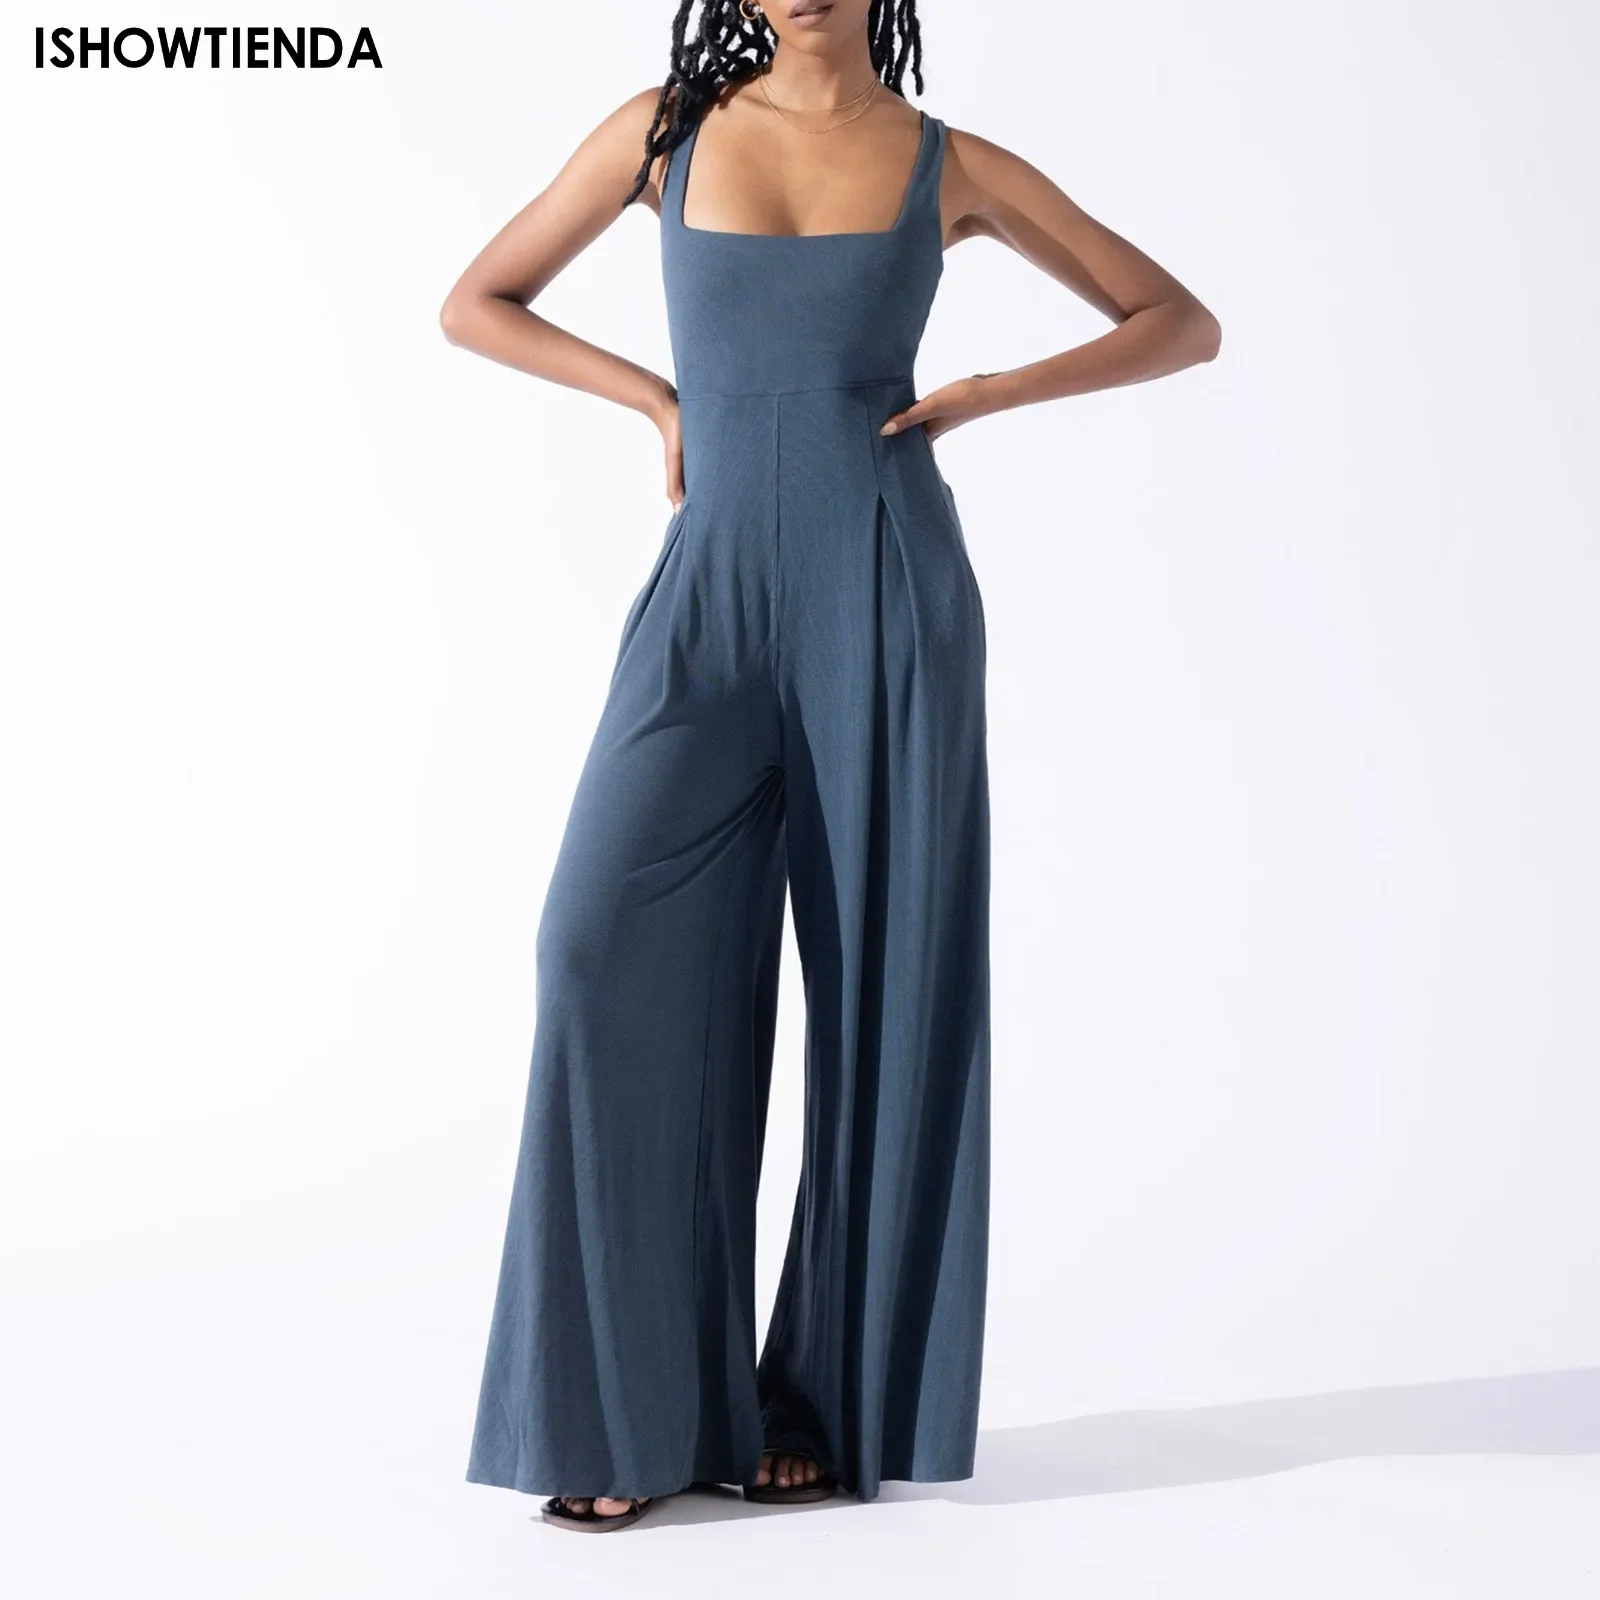 

Jumpsuit Wide-leg Trousers Solid Dungaree Bib Overalls Jumpsuit Women Strap Loose Jumpsuit Romper Boat Neck Sleeveless Playsuits